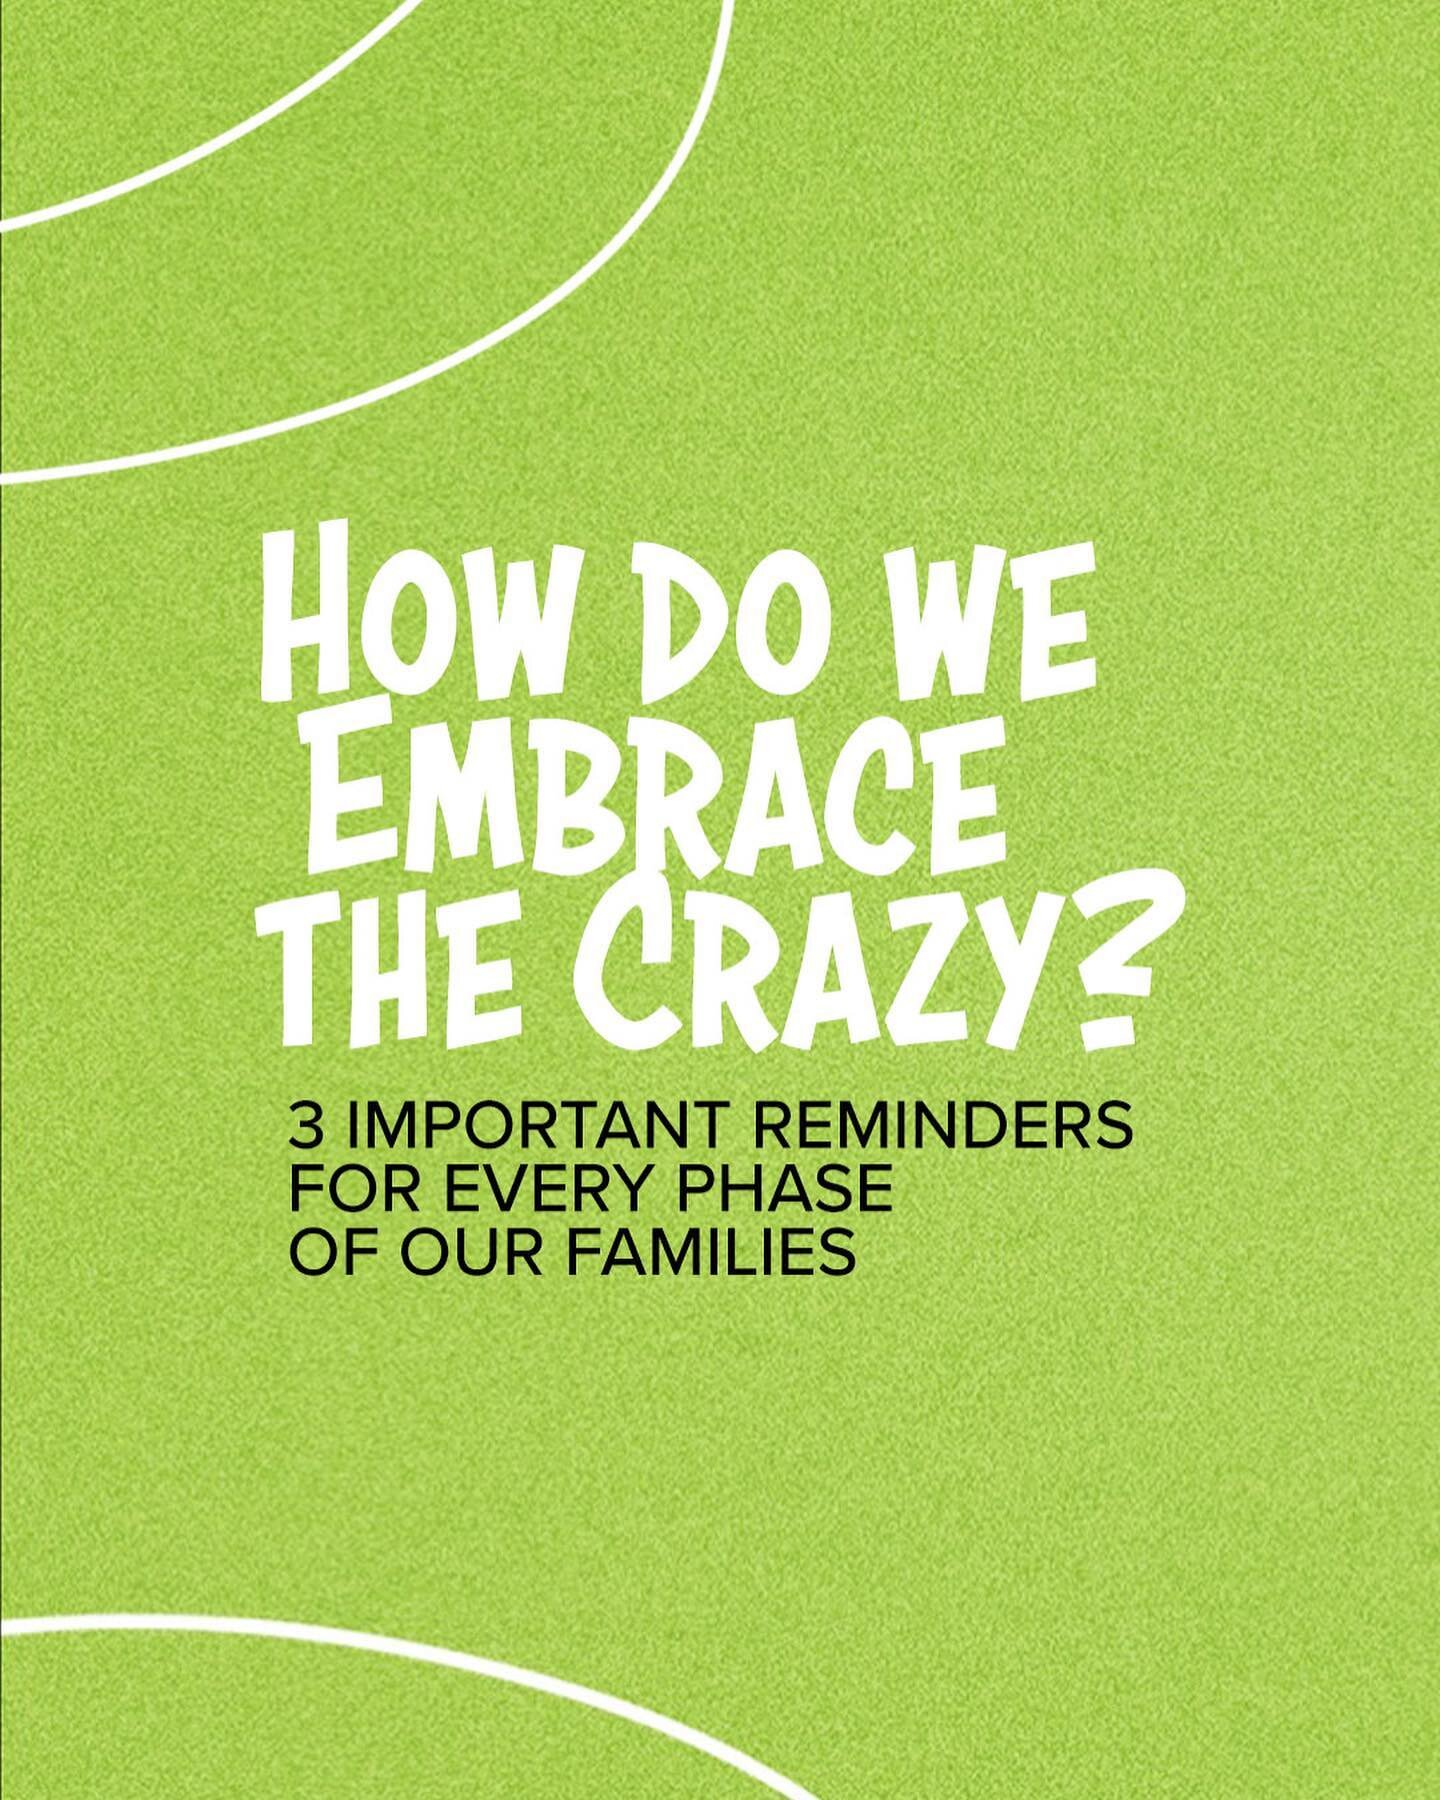 It&rsquo;s time we embrace the crazy. Every family is a little bit crazy, but there&rsquo;s no reason for it to feel like the phases of life we&rsquo;re in can&rsquo;t be used for something larger than ourselves. Here&rsquo;s 3 great reminders when t